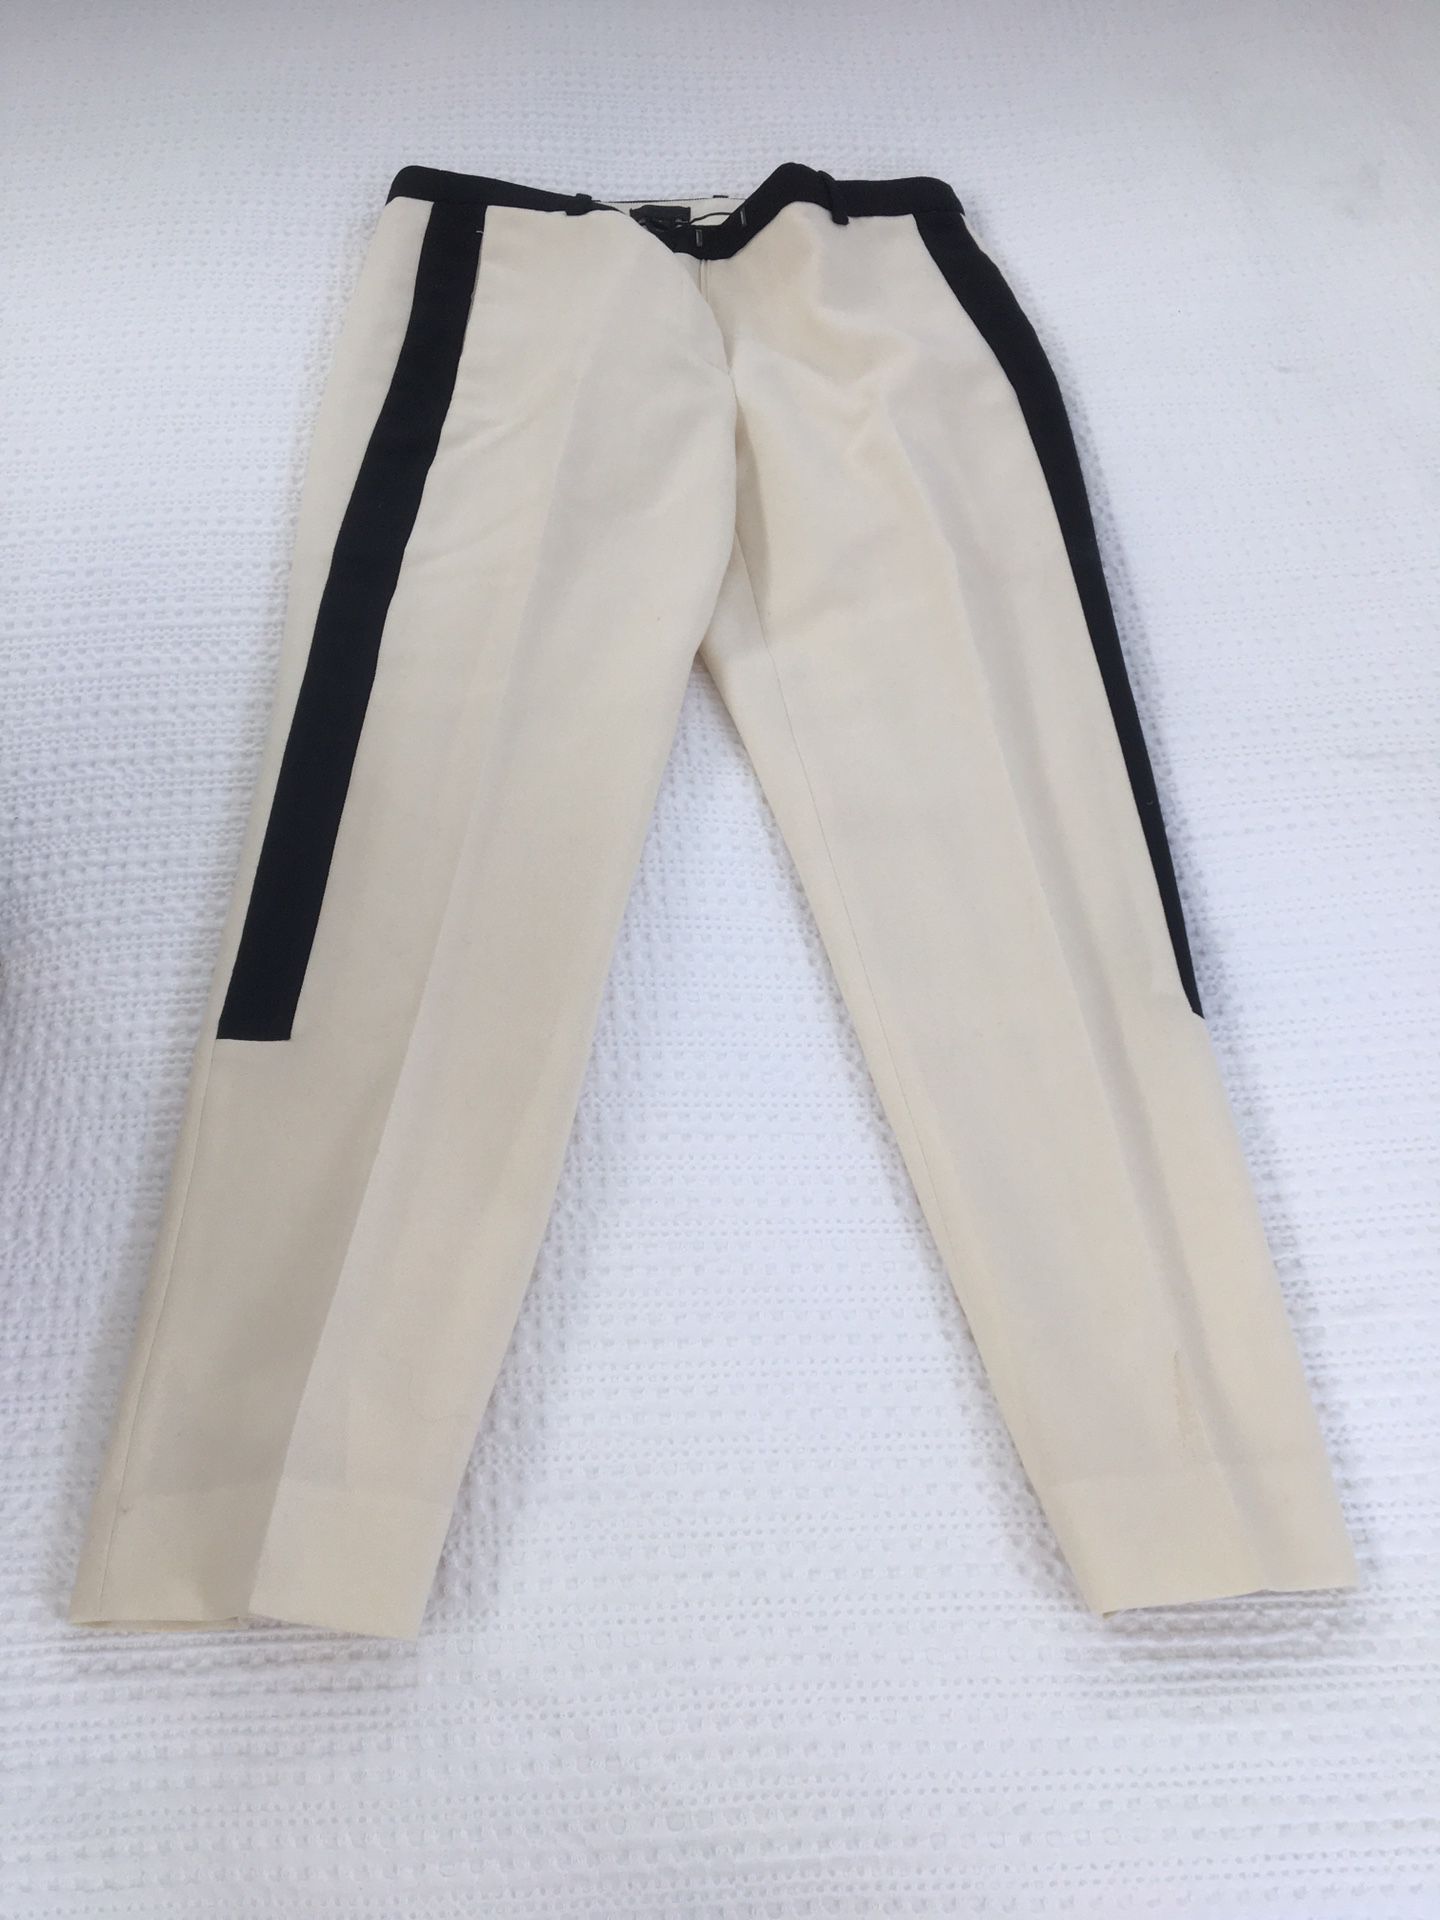 Louis Raphael Dress Pants for Sale in Brentwood, CA - OfferUp